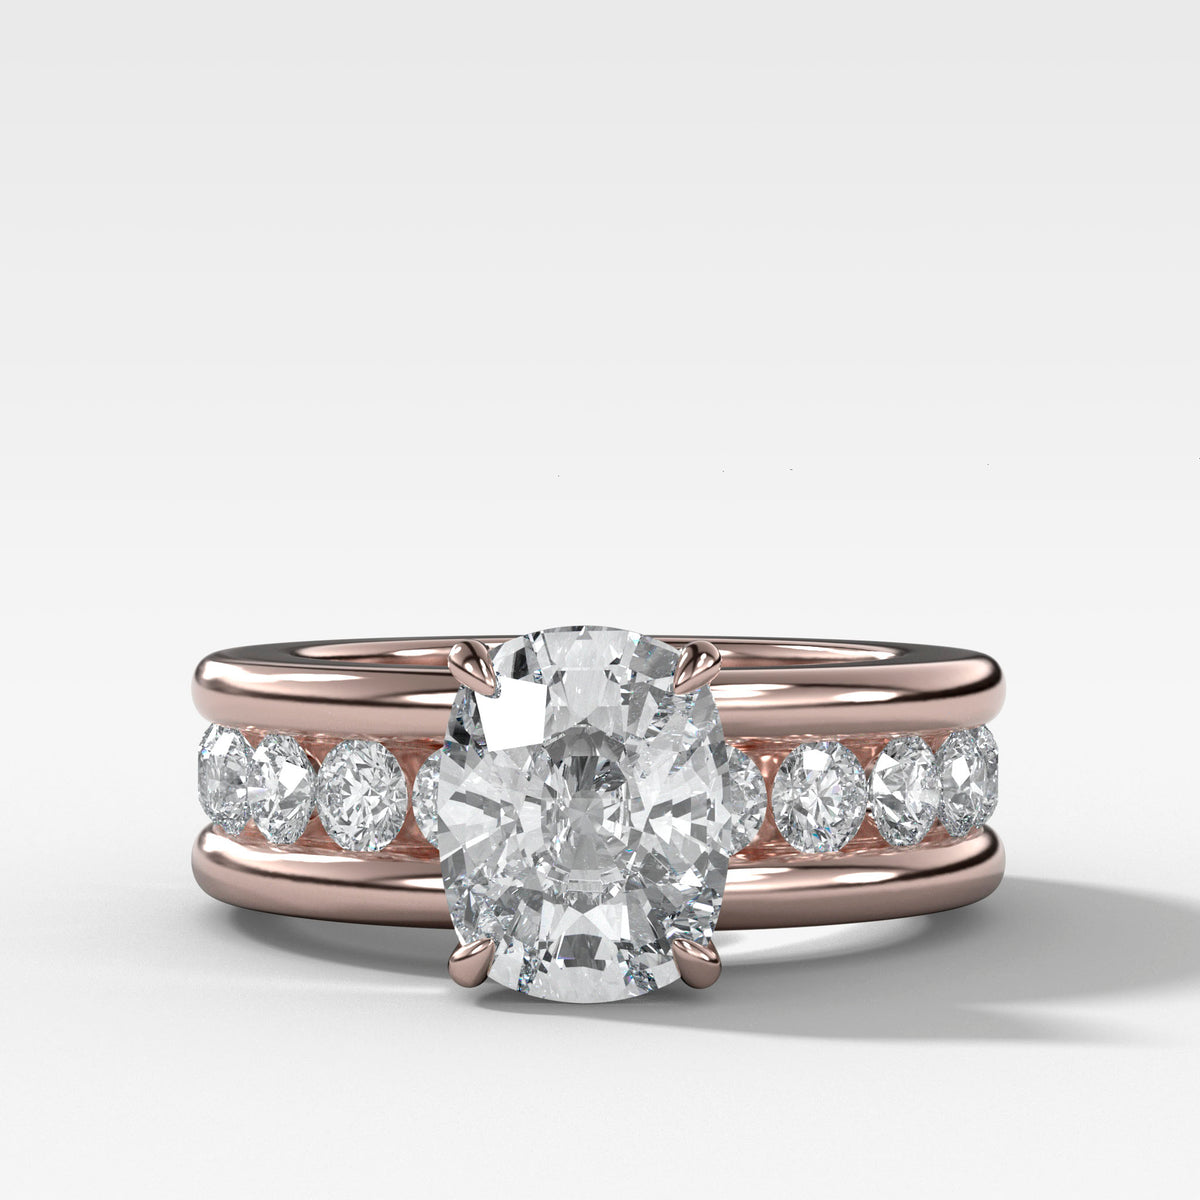 Chunky Channel Set Engagement Ring with Elongated Cushion Cut Diamond